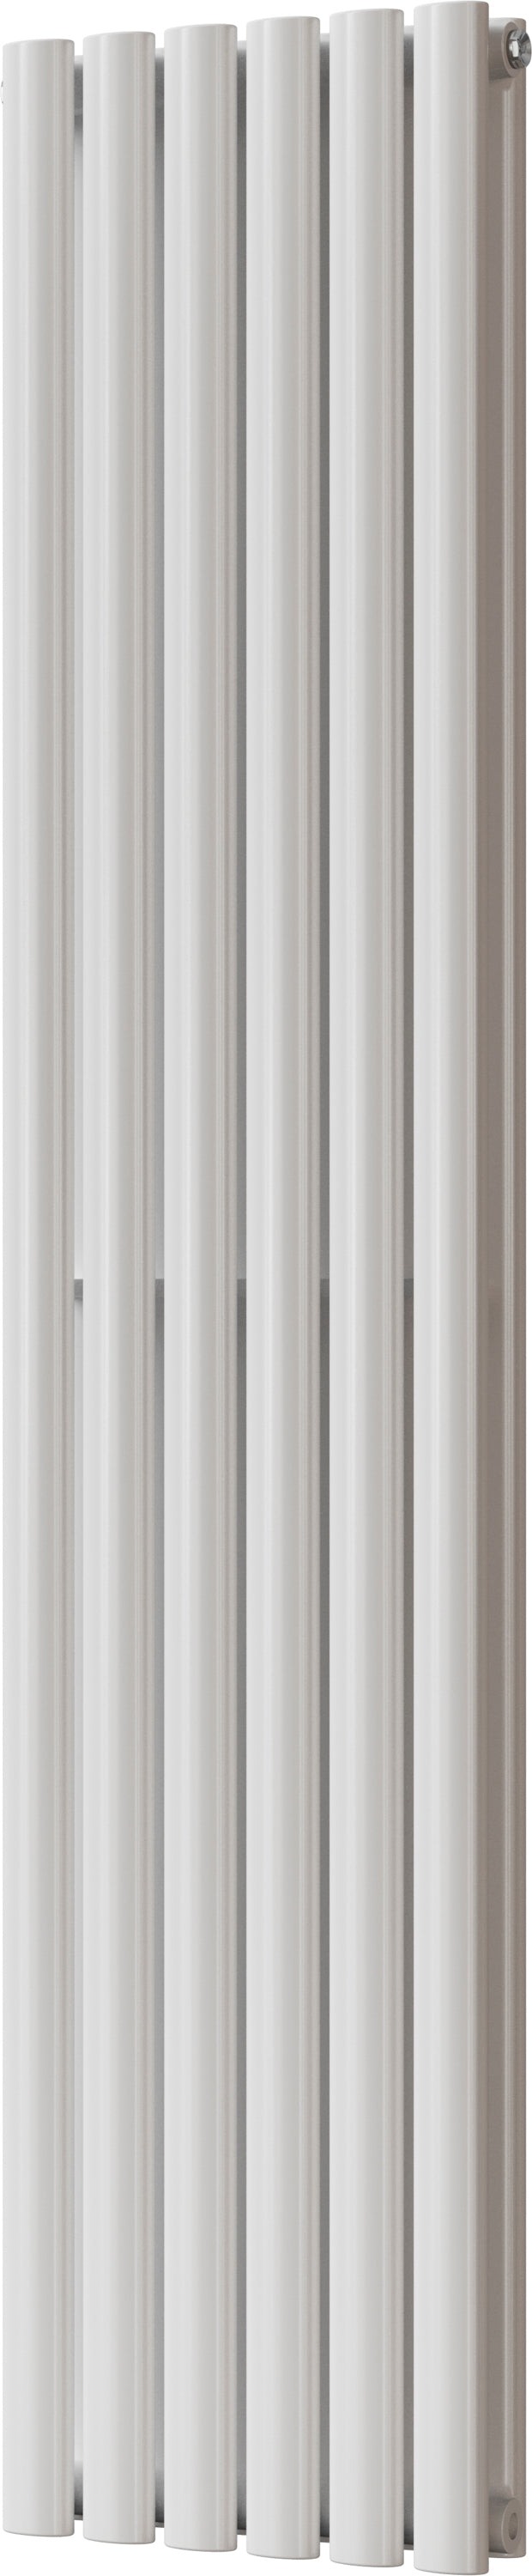 Omeara - White Vertical Radiator H1600mm x W348mm Double Panel